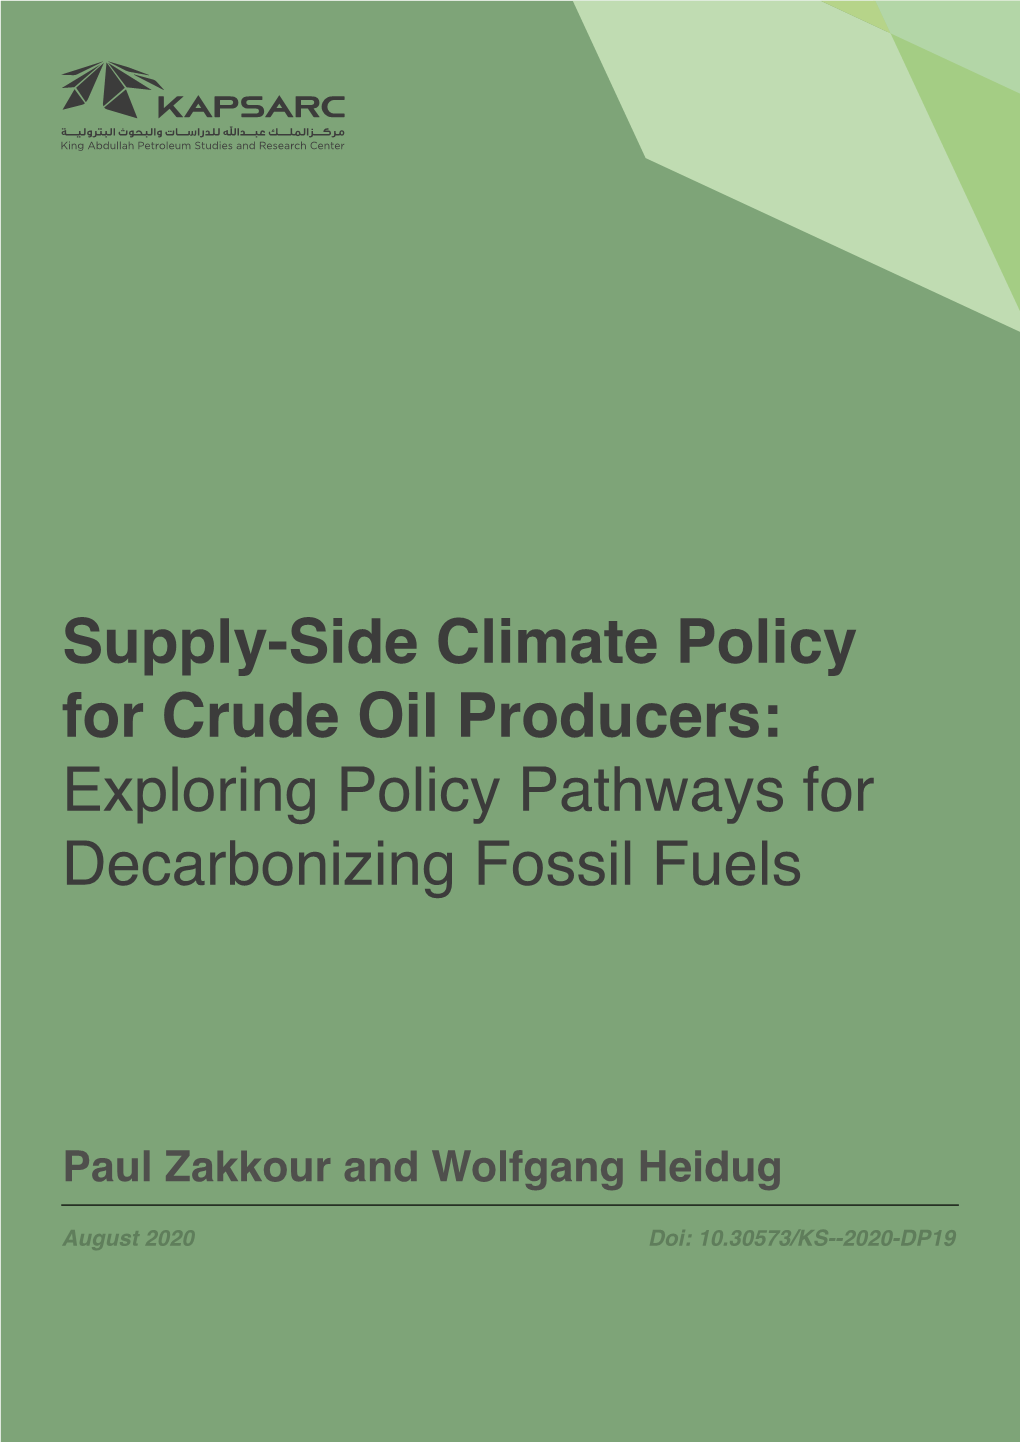 Supply-Side Climate Policy for Crude Oil Producers: Exploring Policy Pathways for Decarbonizing Fossil Fuels